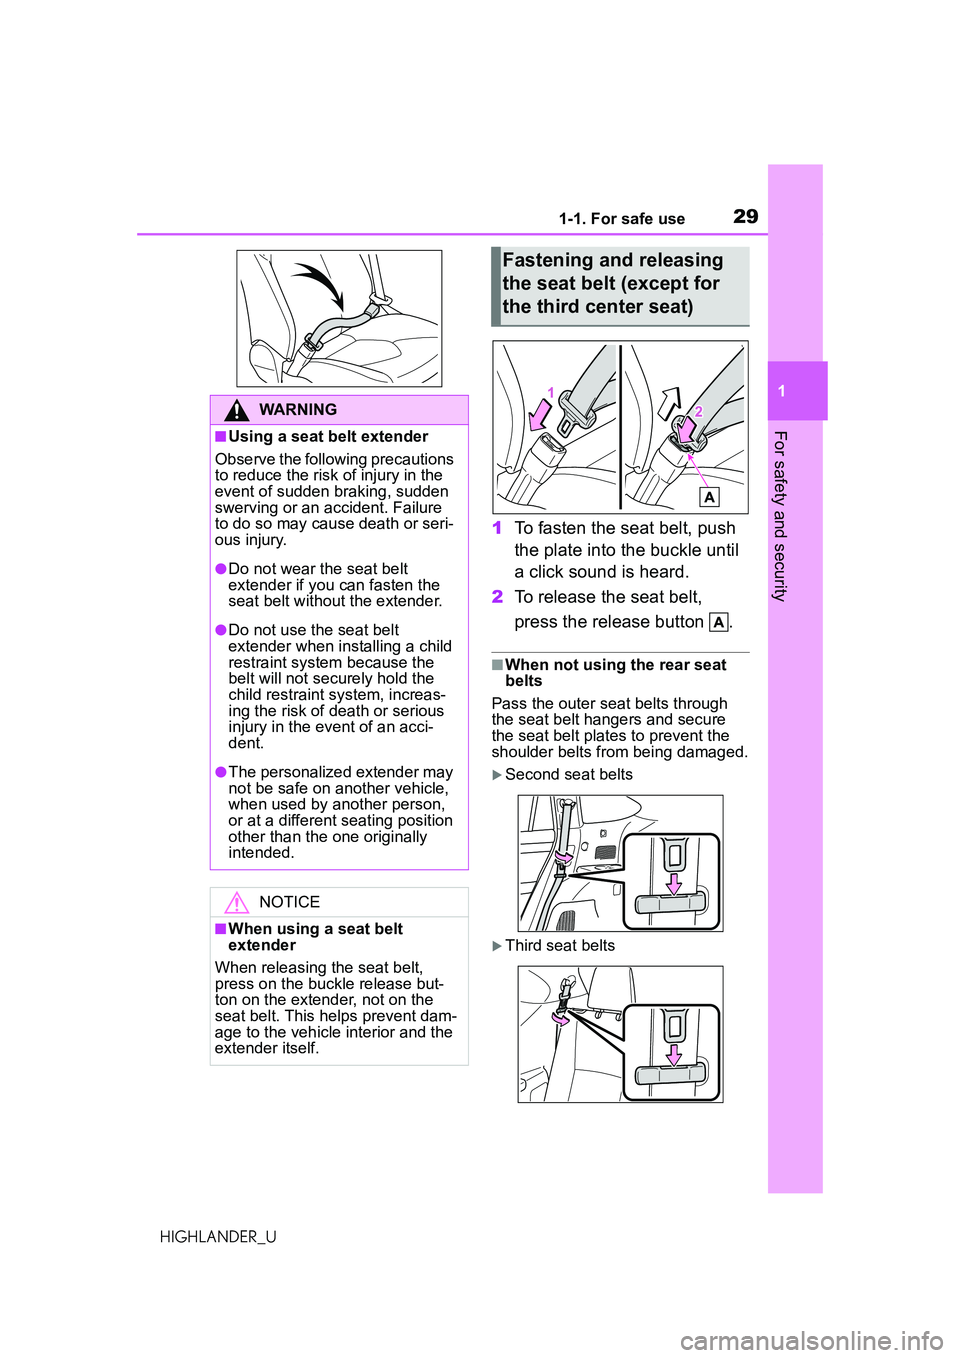 TOYOTA HIGHLANDER 2021  Owners Manual (in English) 291-1. For safe use
1
For safety and security
HIGHLANDER_U
1To fasten the seat belt, push 
the plate into the buckle until 
a click sound is heard.
2 To release the seat belt, 
press the release butto